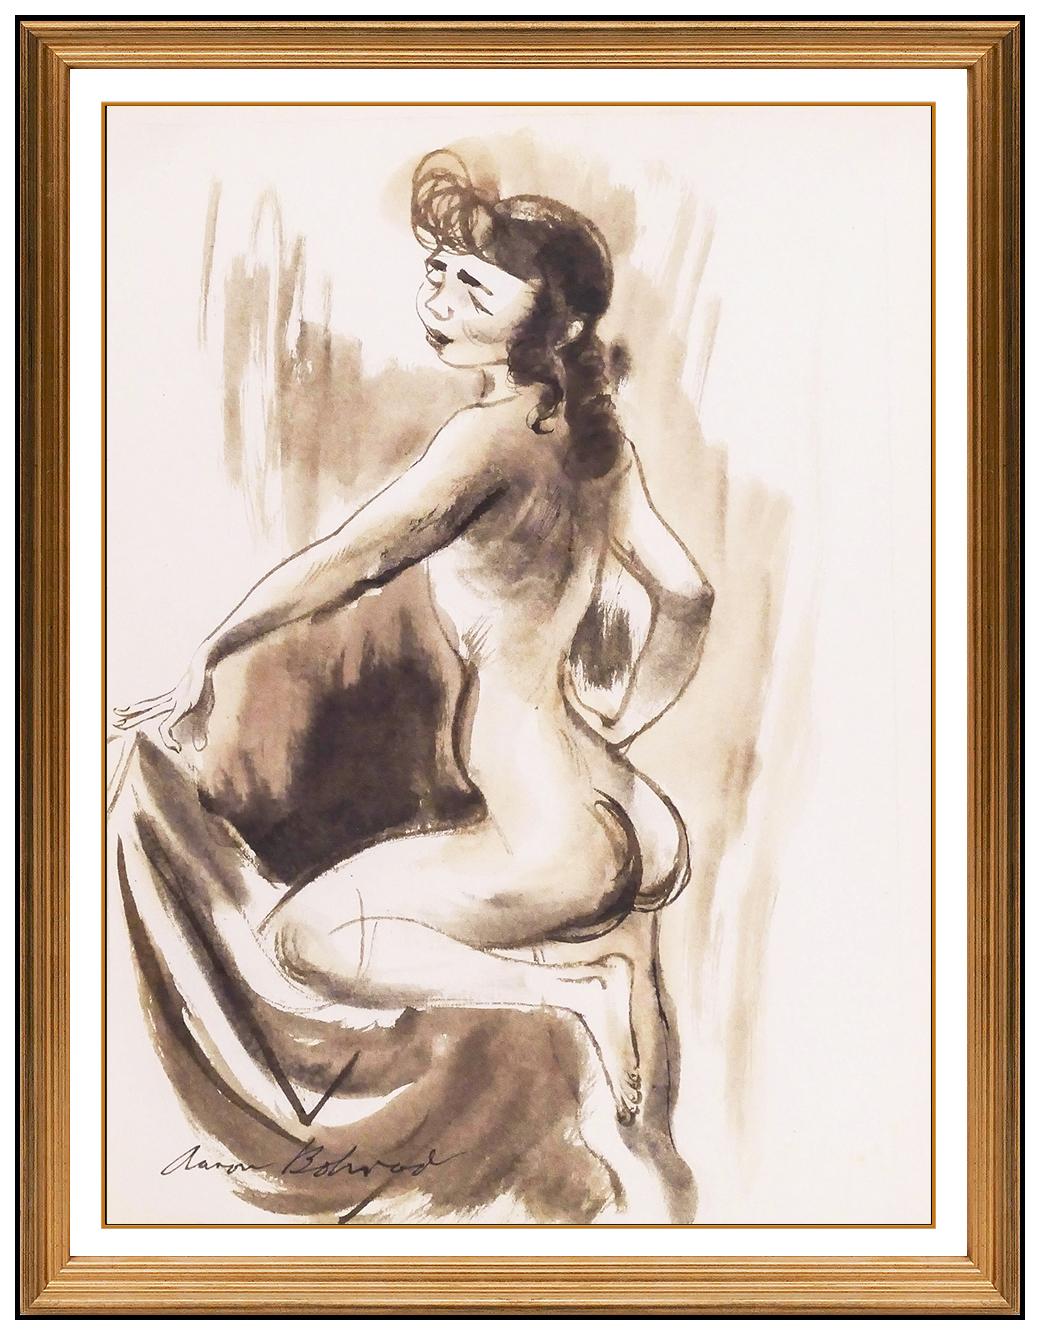 Artist: Aaron Bohrod
Title: Splendor Original
Medium: Original Ink and Watercolor Painting
Size: 11 x 8"
Frame: 18 x 15.5"
Published on page 82 of "Aaron Bohrod: Figure Sketches"